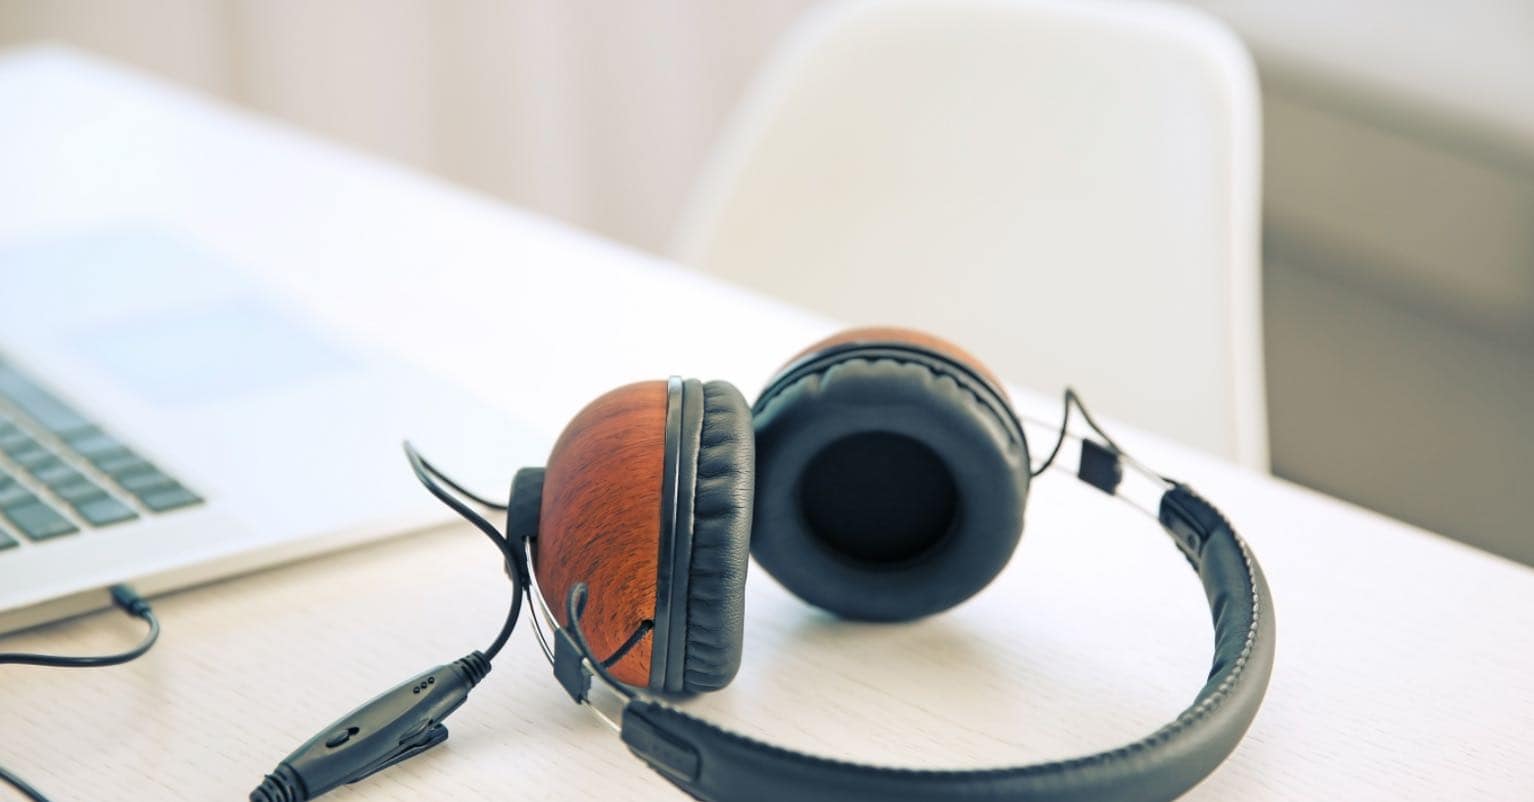 Here are some factors which you have to consider before buying a headphone.